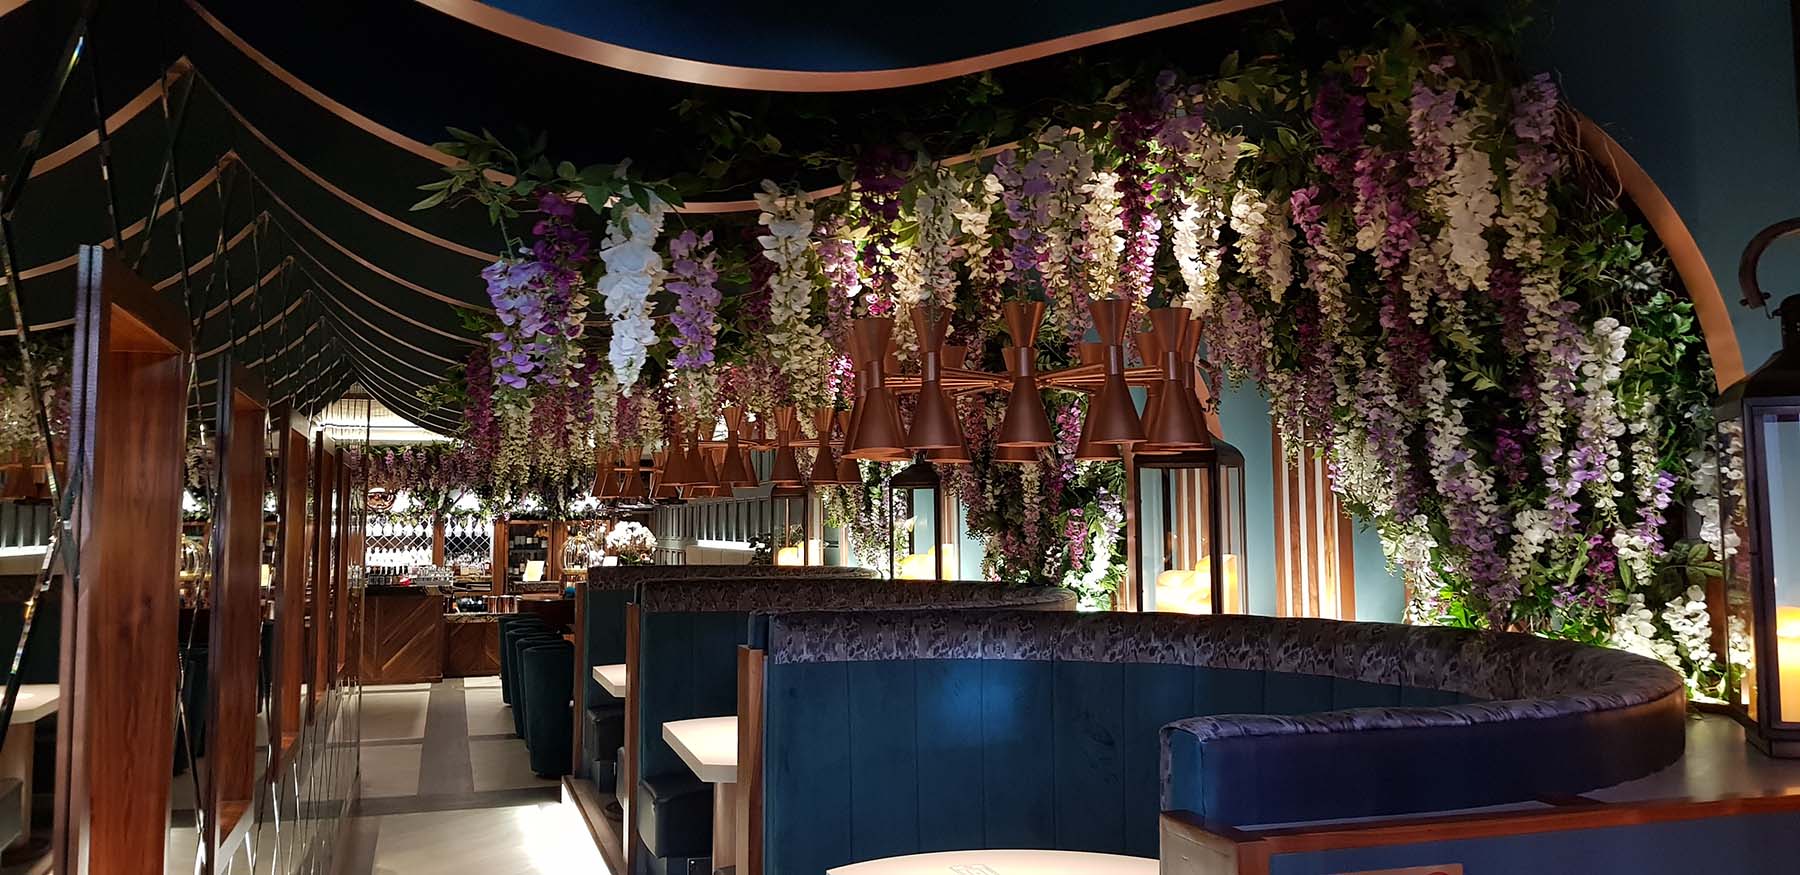 Beautiful trailing artificial foliage and festooned wisteria flowers create stunning atmosphere at Aberdeen Wine Bar